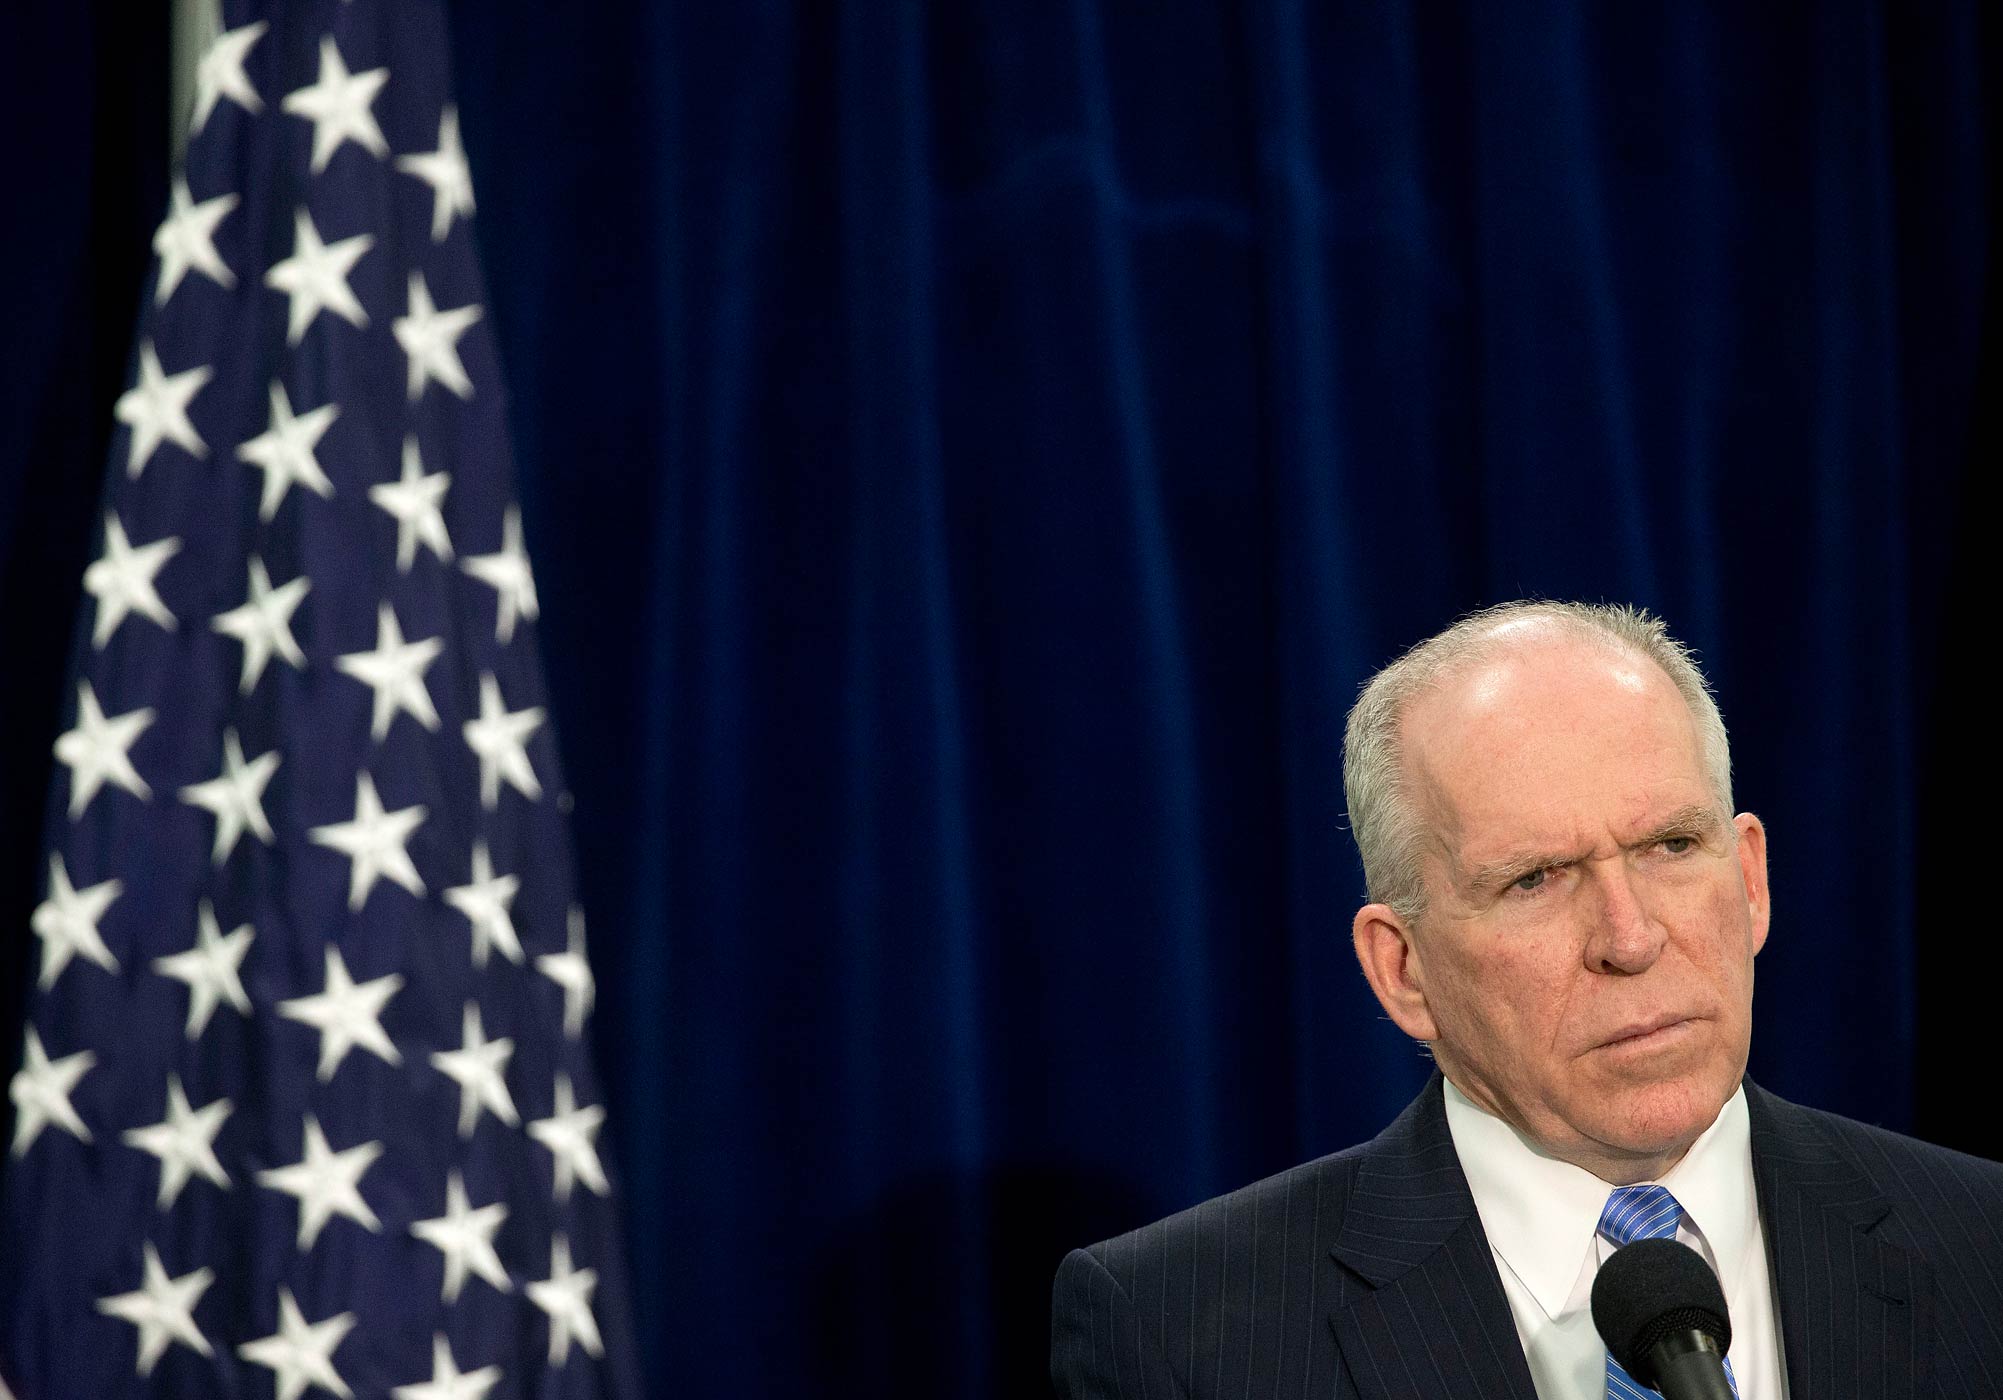 CIA Director John Brennan attends a news conference at CIA headquarters in Langley, Va., on Dec. 11, 2014. (Pablo Martinez Monsivais—AP)